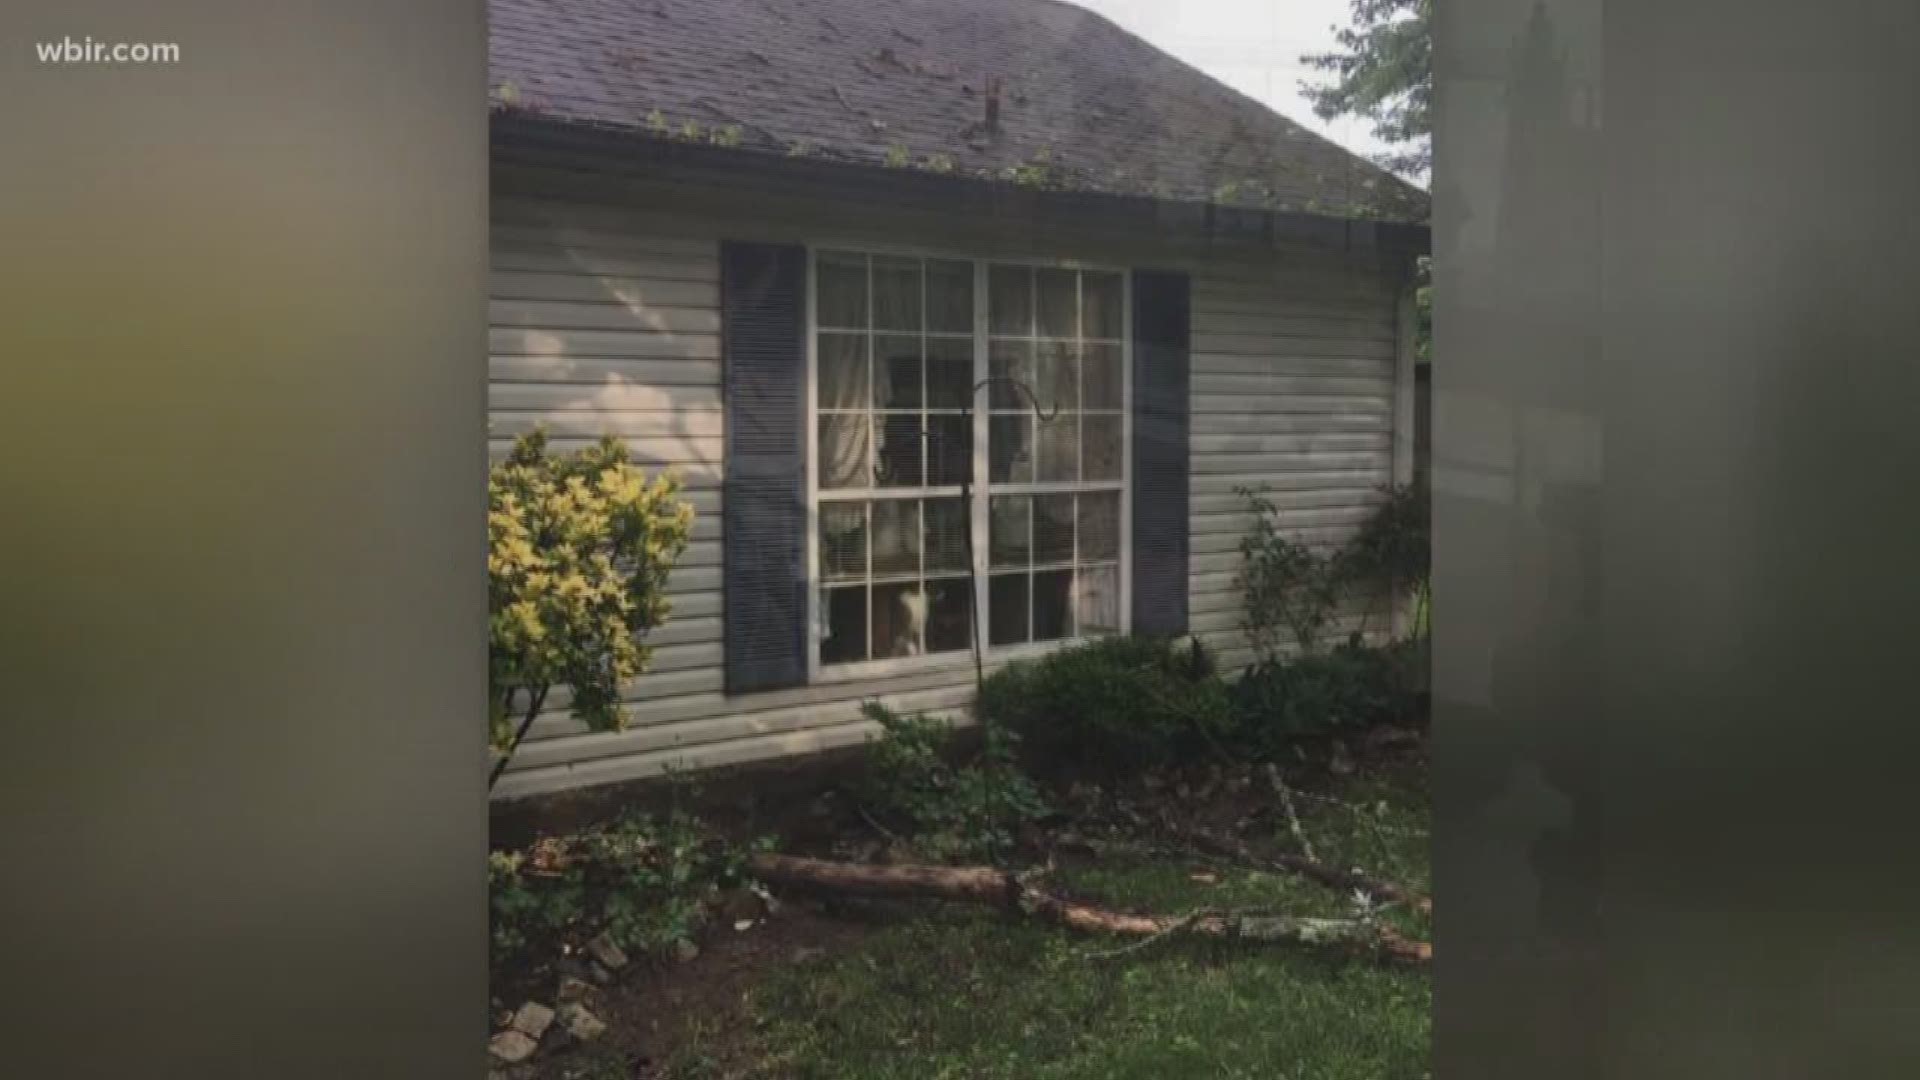 Folks across east Tennessee experienced storm damage.